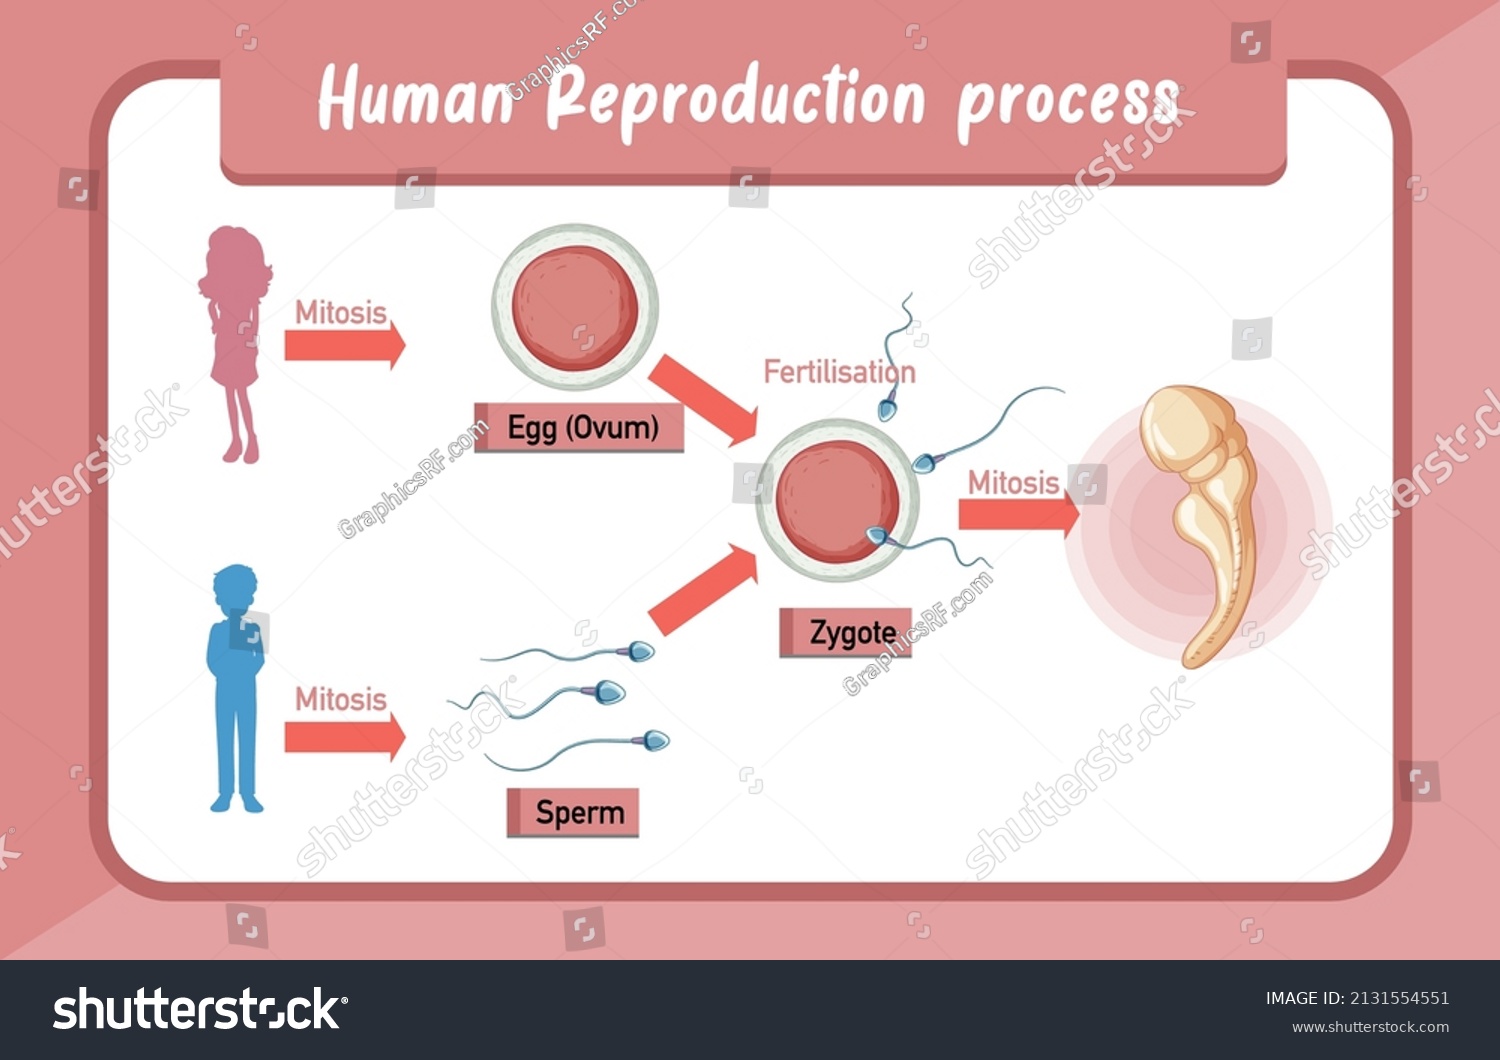 Human Reproduction Process Infographic Illustration Stock Vector